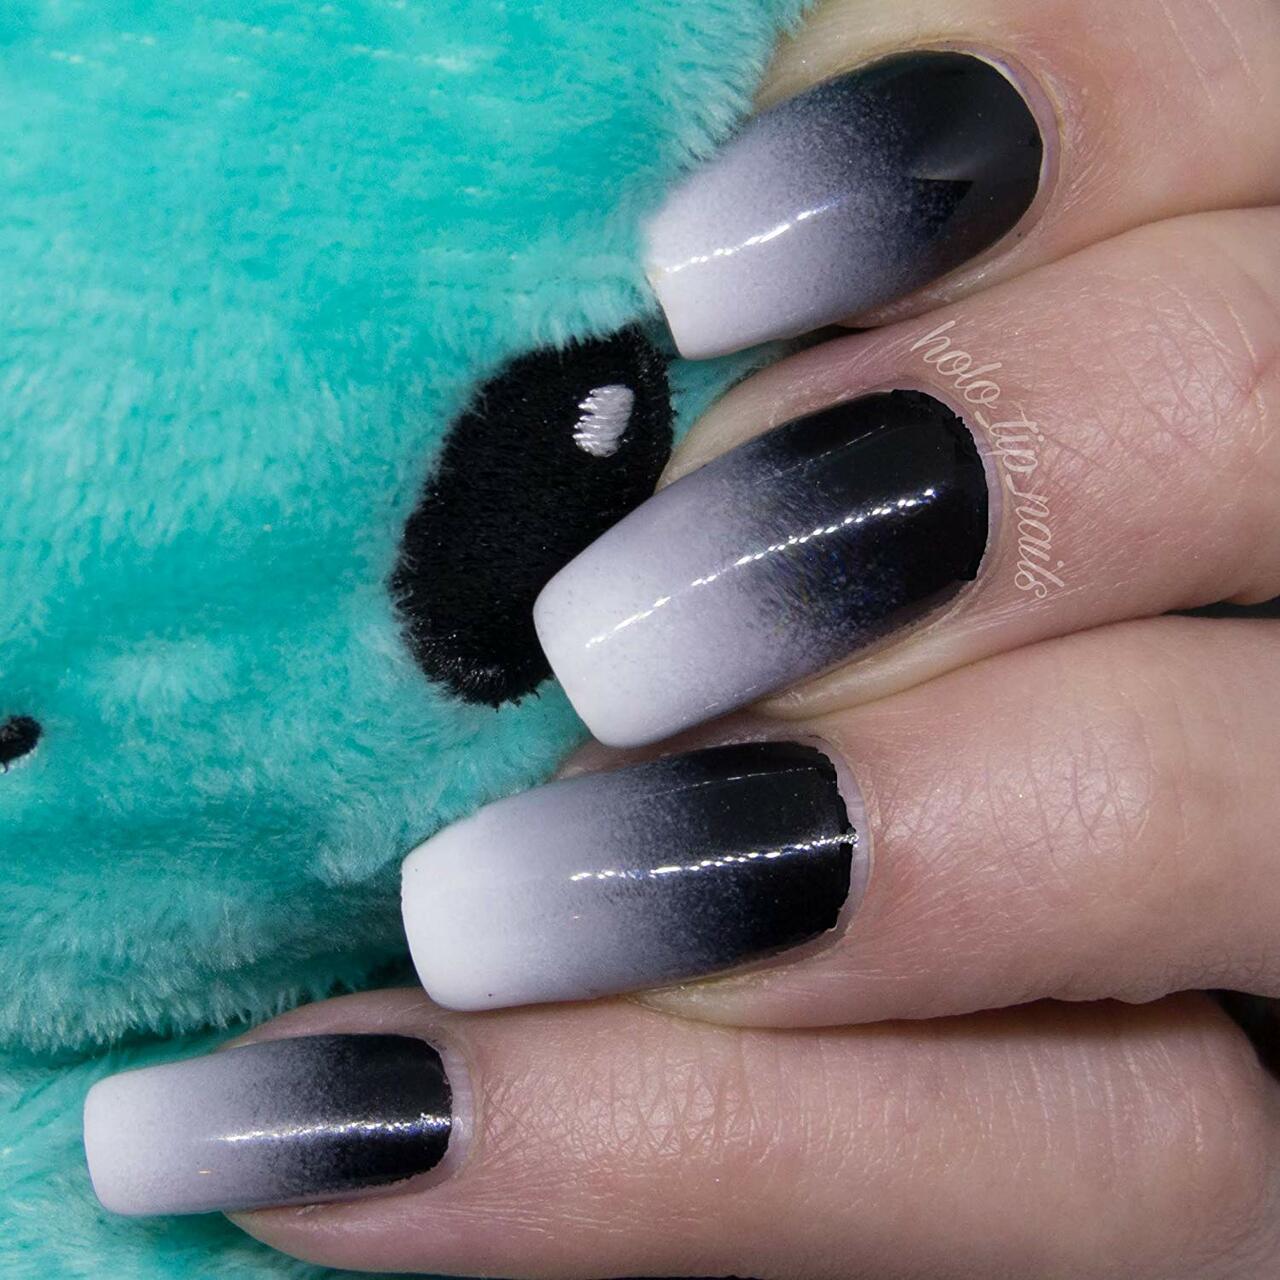 11 Ombré Nail Designs To Inspire Your Next Manicure